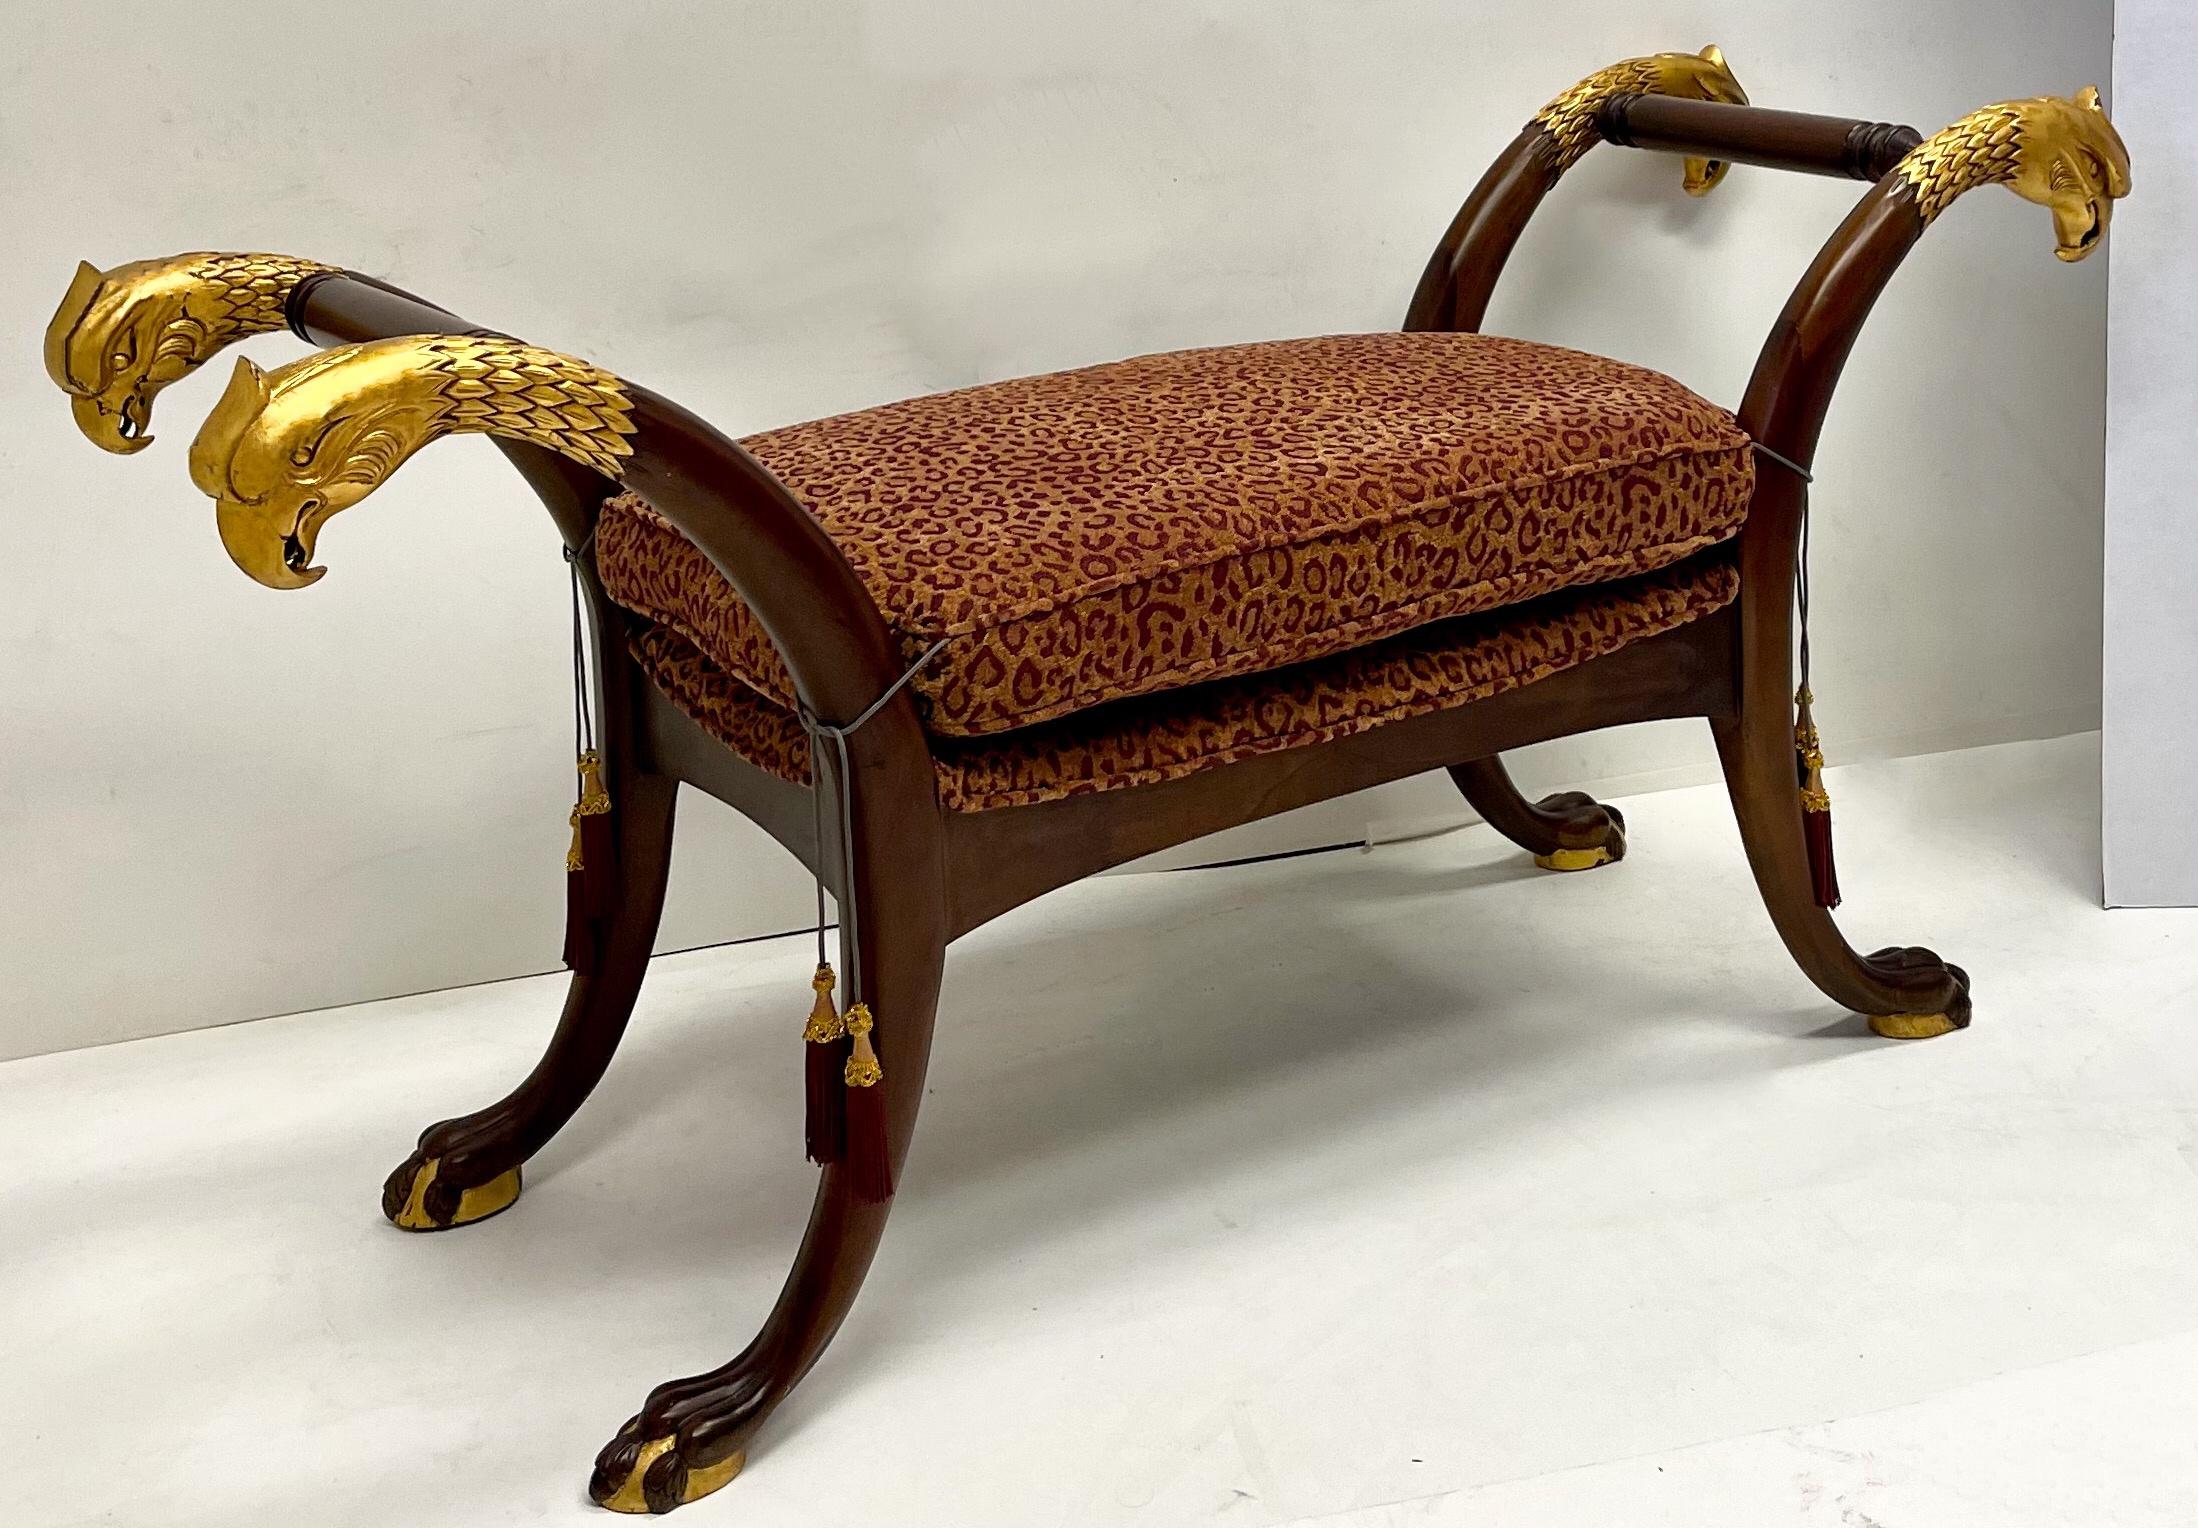 This is a late 20th century French Empire style mahogany bench with gilt eagle and paw accents. It has vintage leopard upholstery. It is in very good condition.